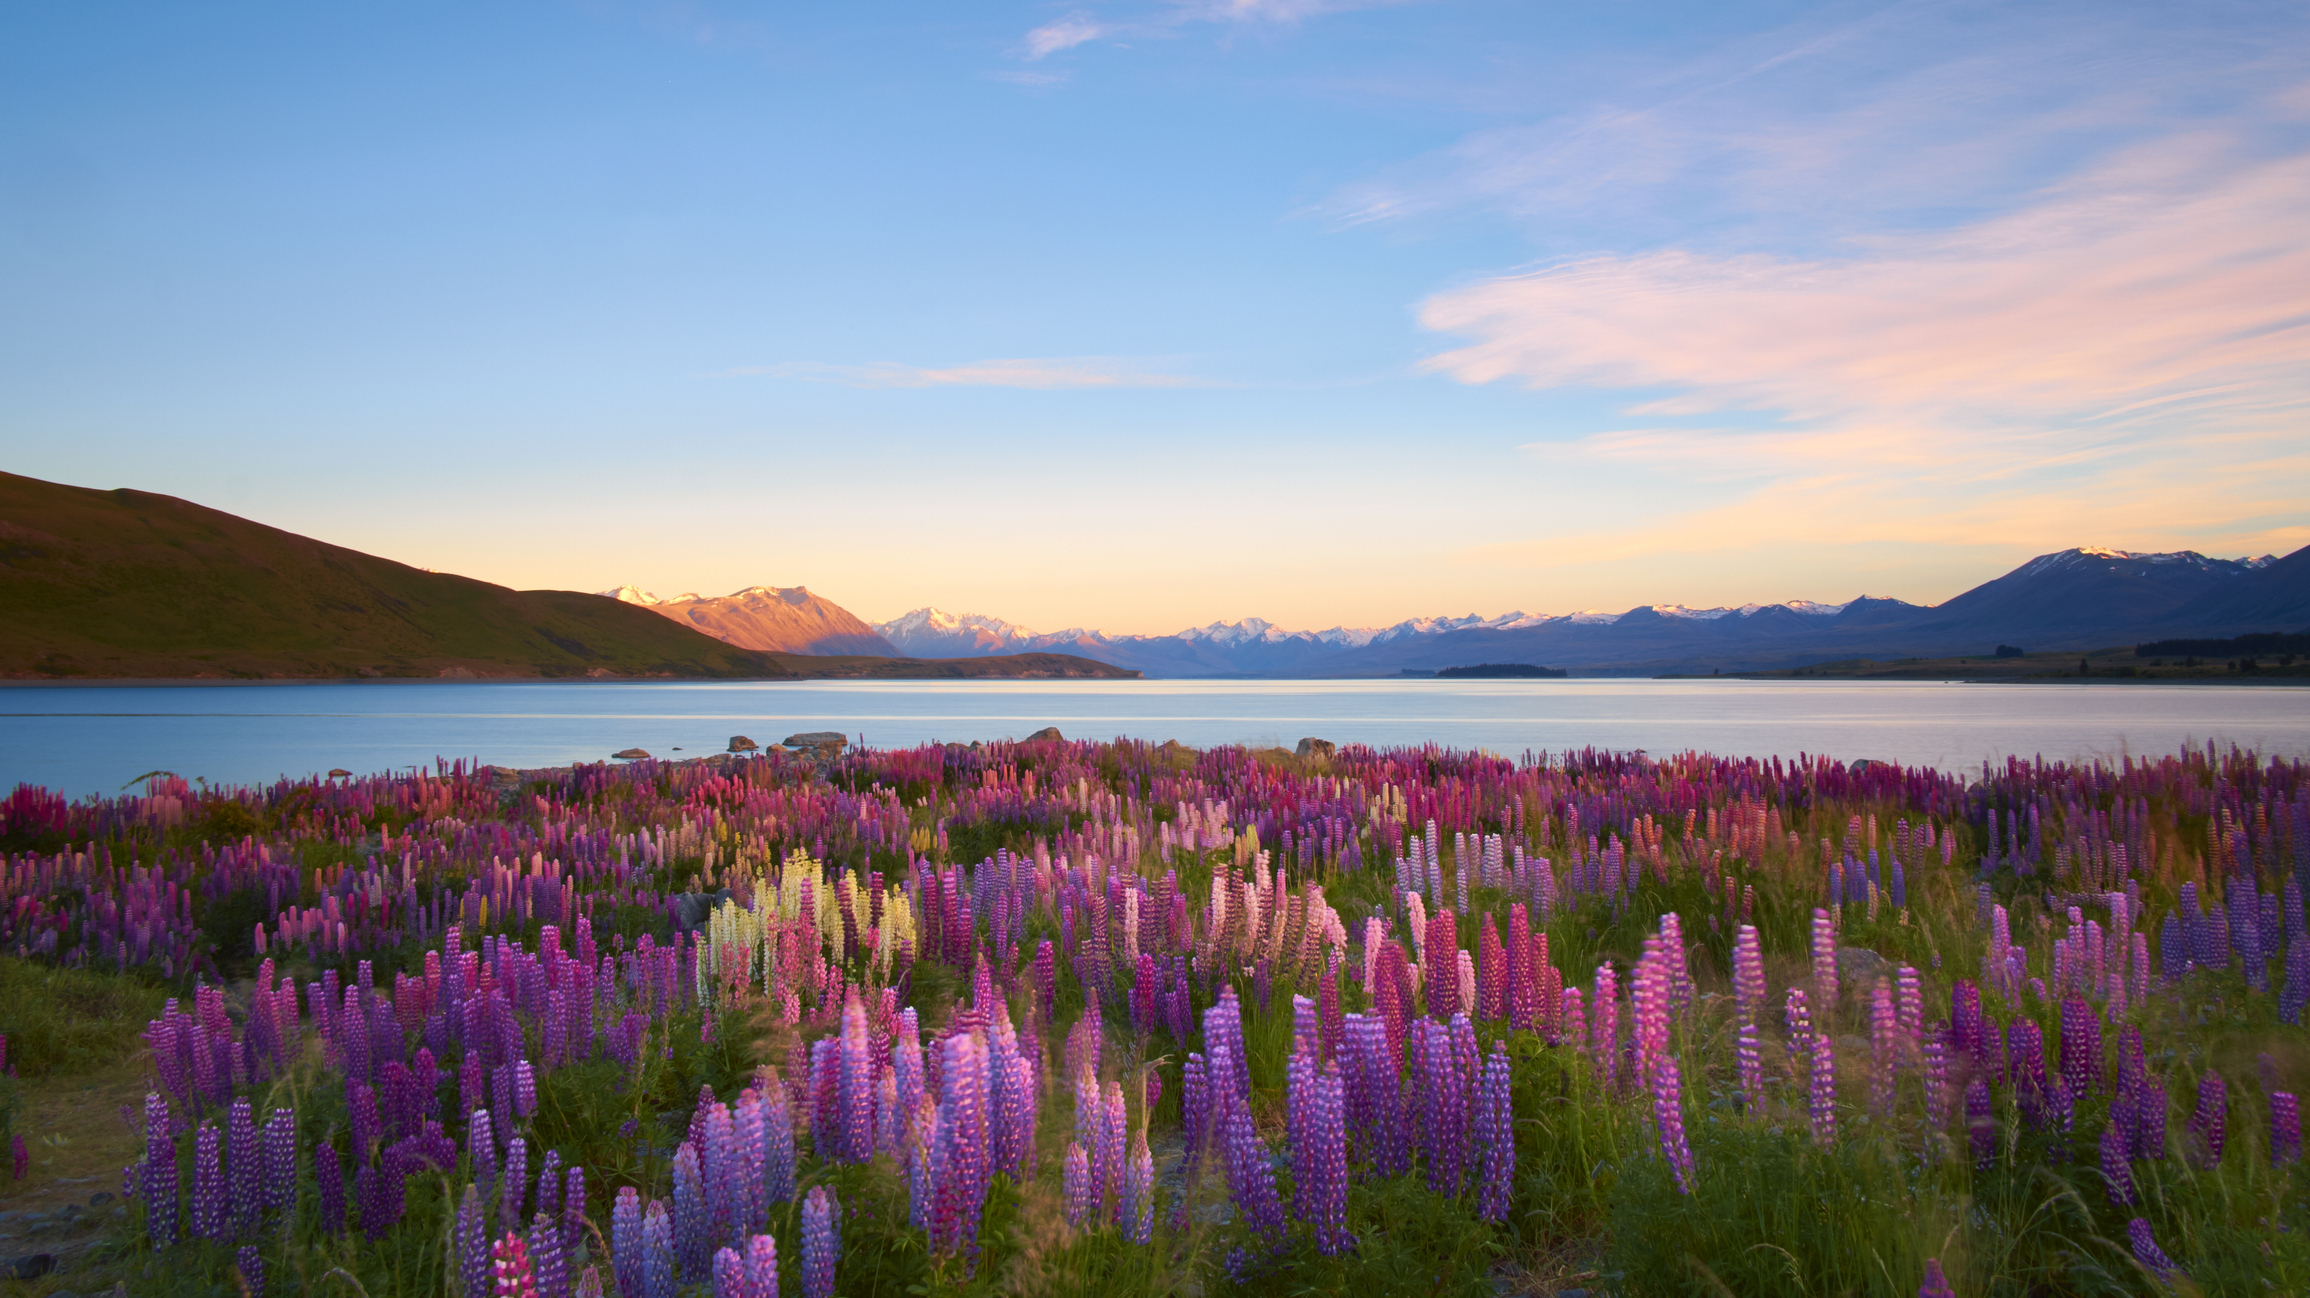 A beautiful, serene lake surrounded by blooming wildflowers and distant mountains under a clear sky at sunset